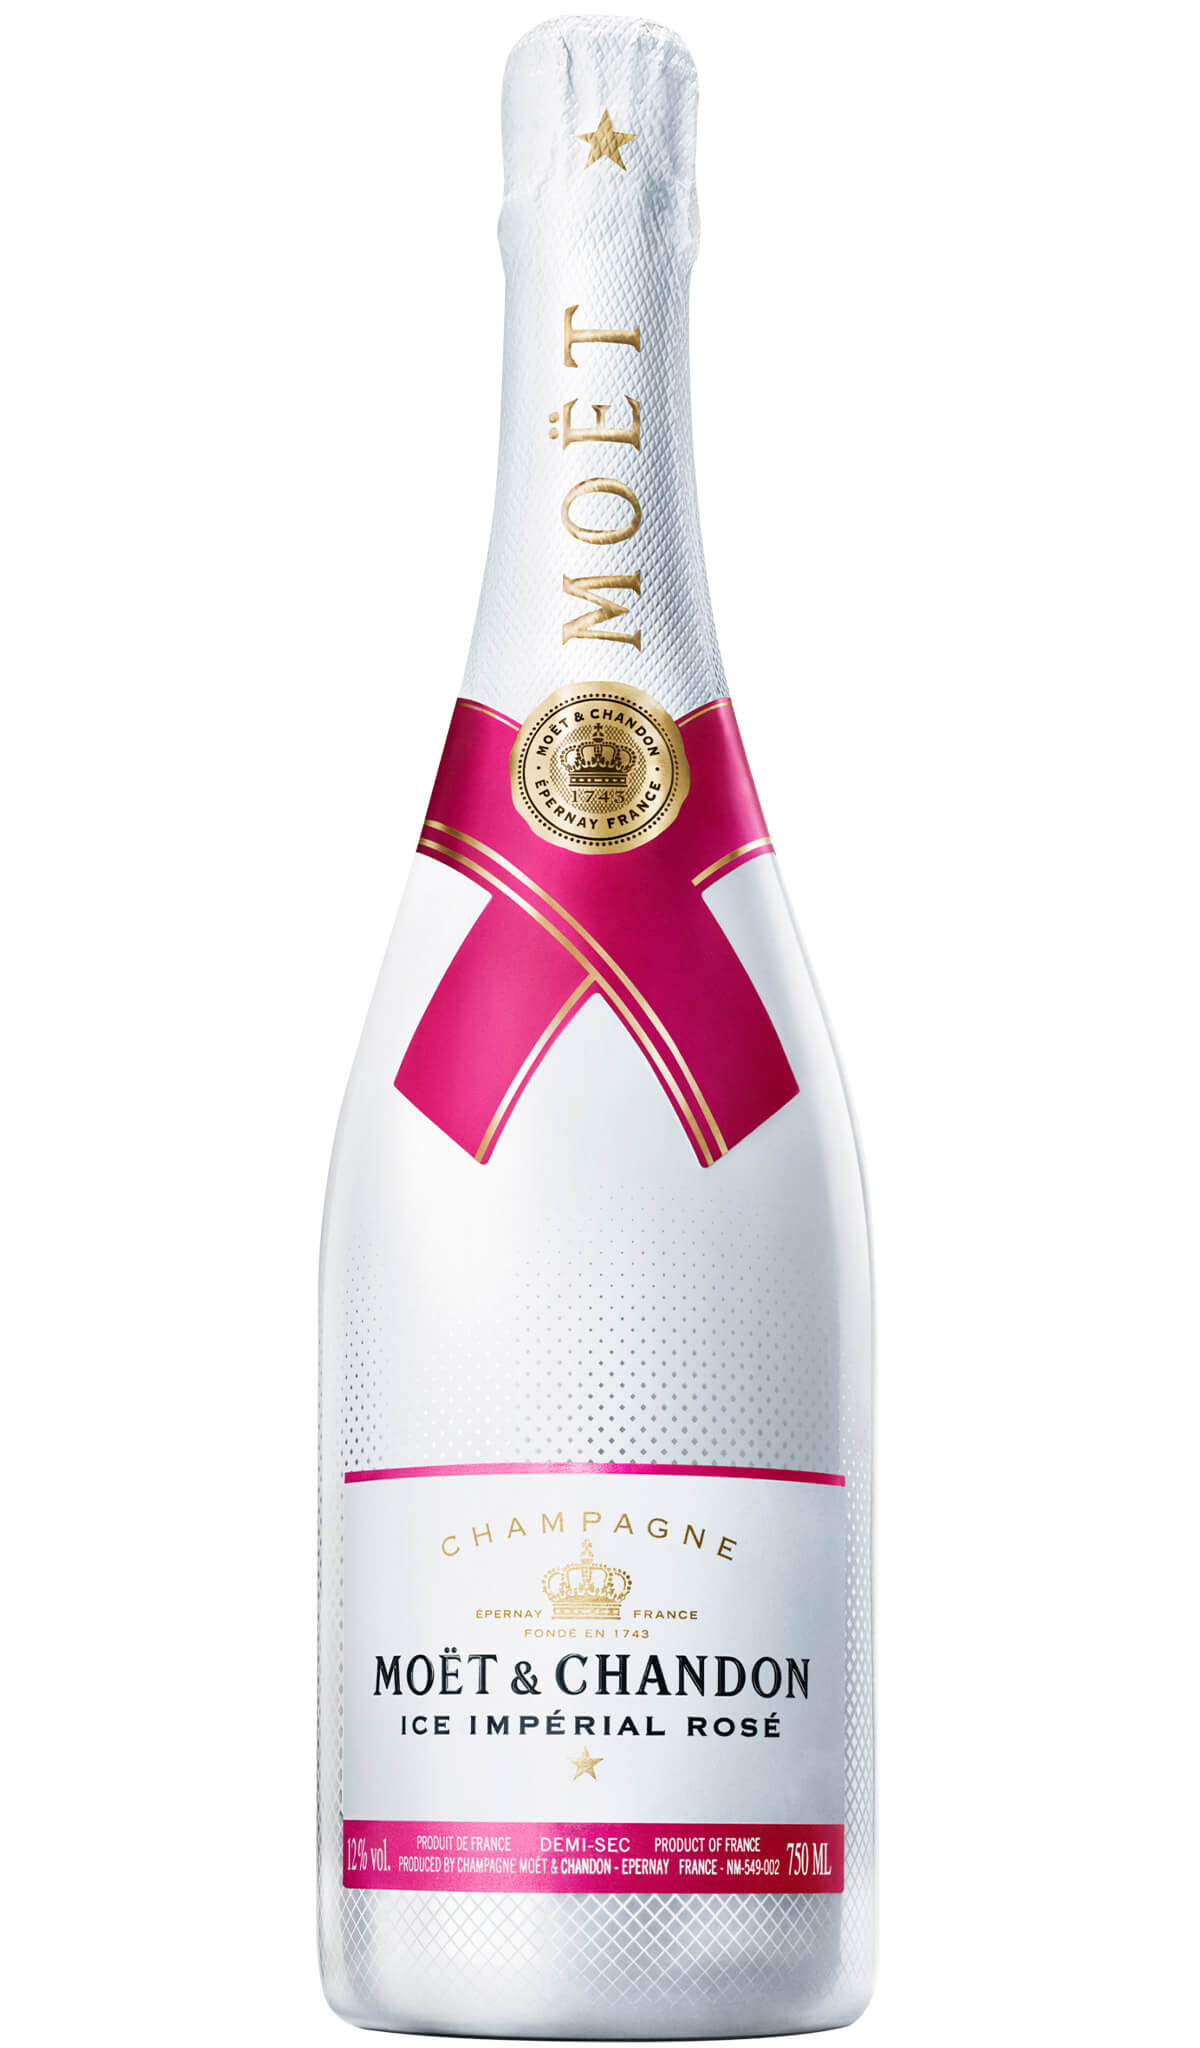 Find out more, explore the range and purchase Moët & Chandon Ice Imperial Rose NV (France) available online at Wine Sellers Direct - Australia's independent liquor specialists.